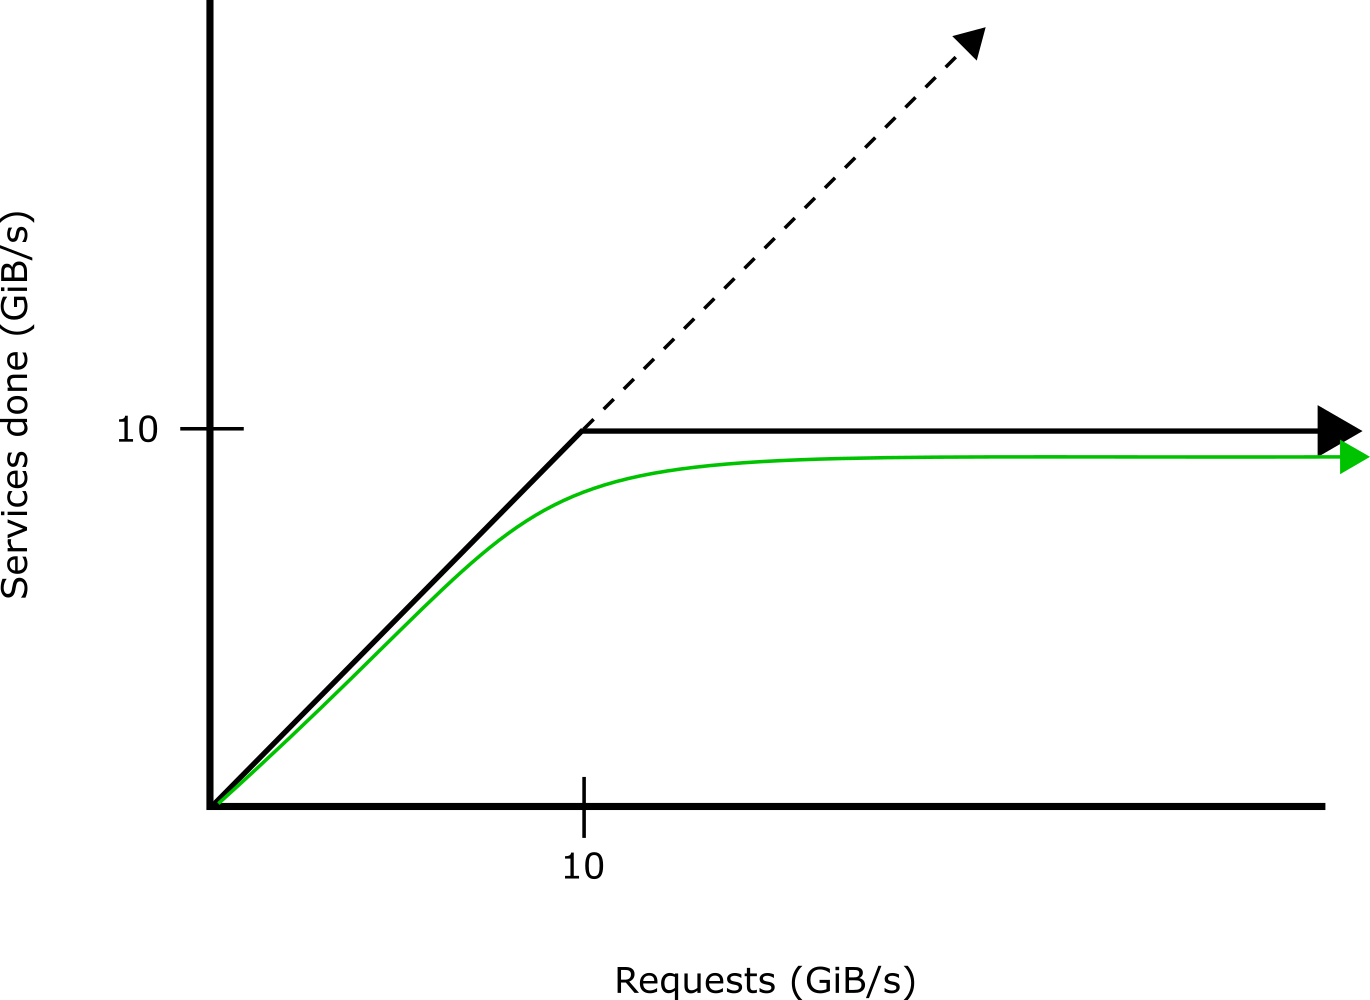 The livelock condition behavior of the receiving process.